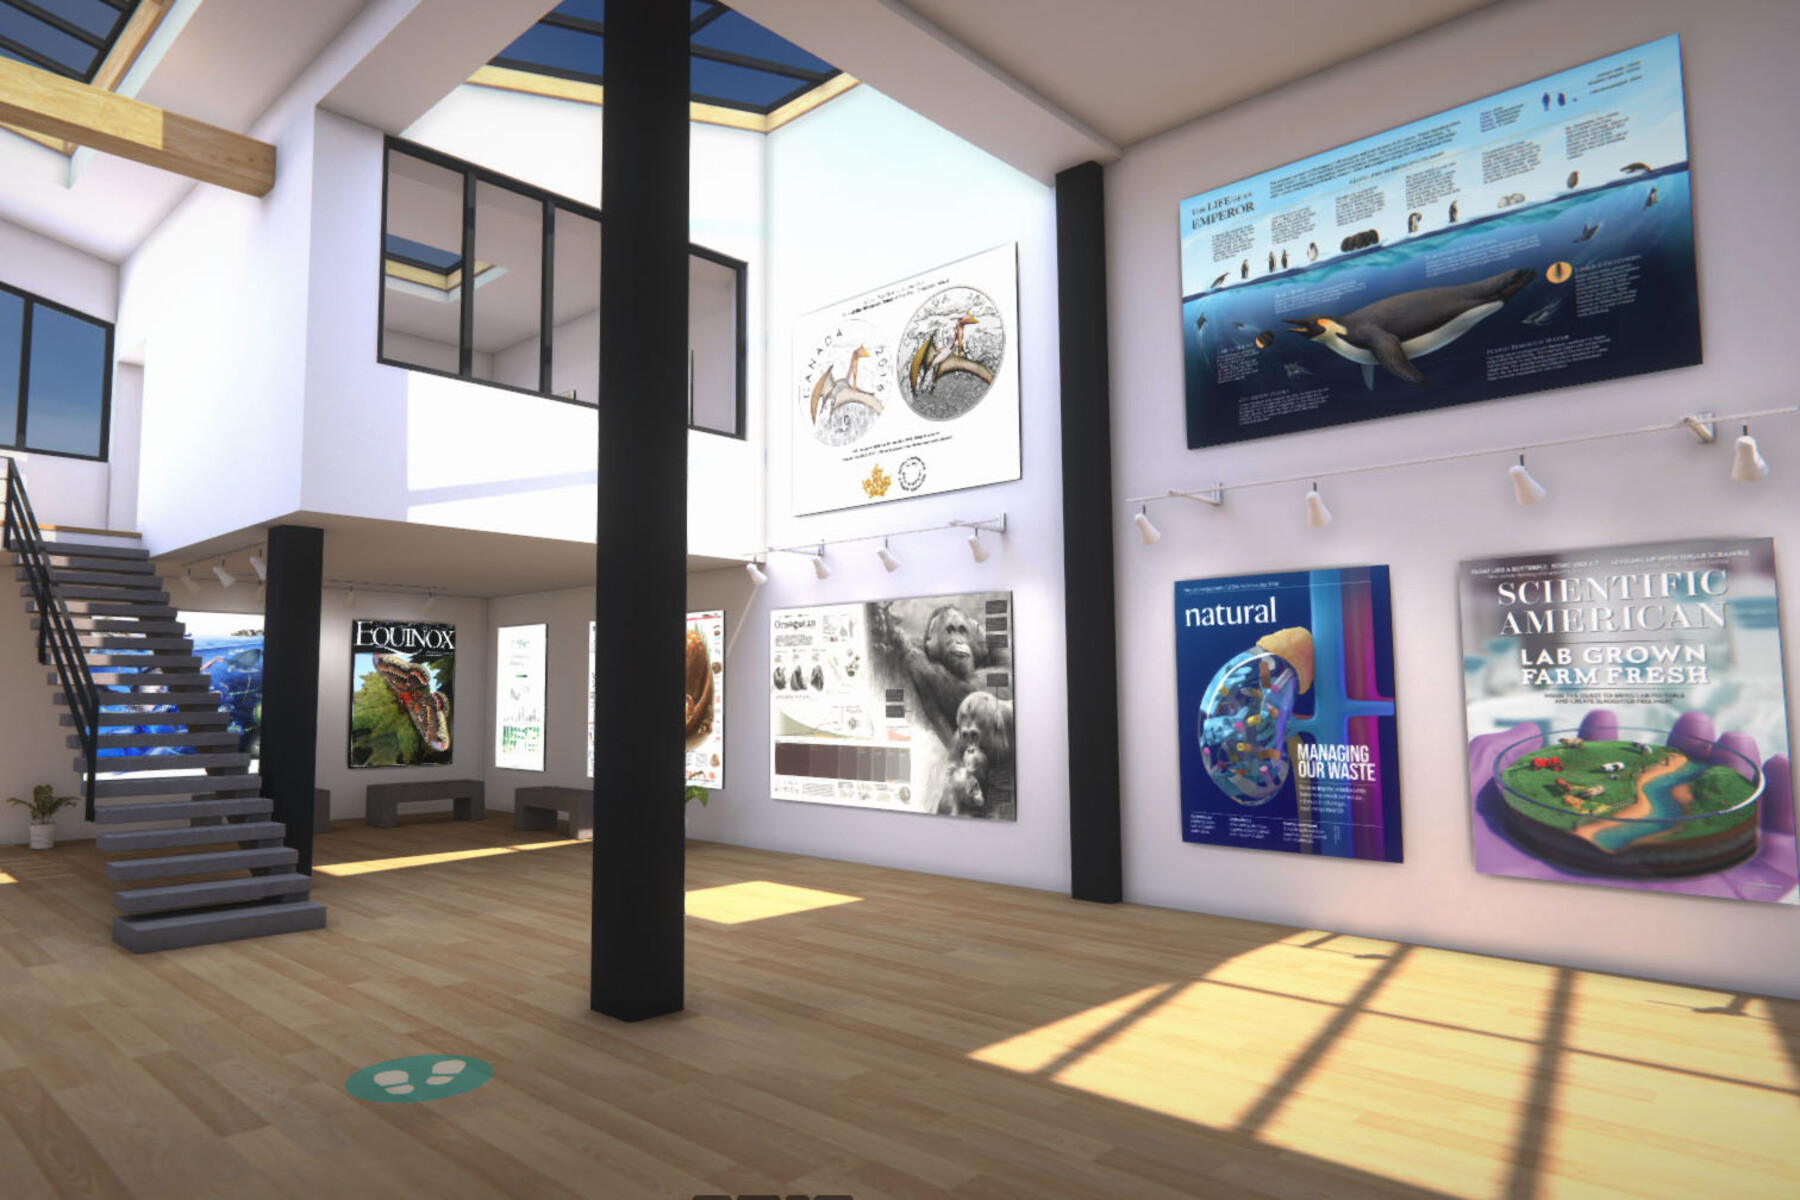 THE COLLECTION IN A VIRTUAL SPACE THAT MIMICS THAT OF A PHYSICAL GALLERY.